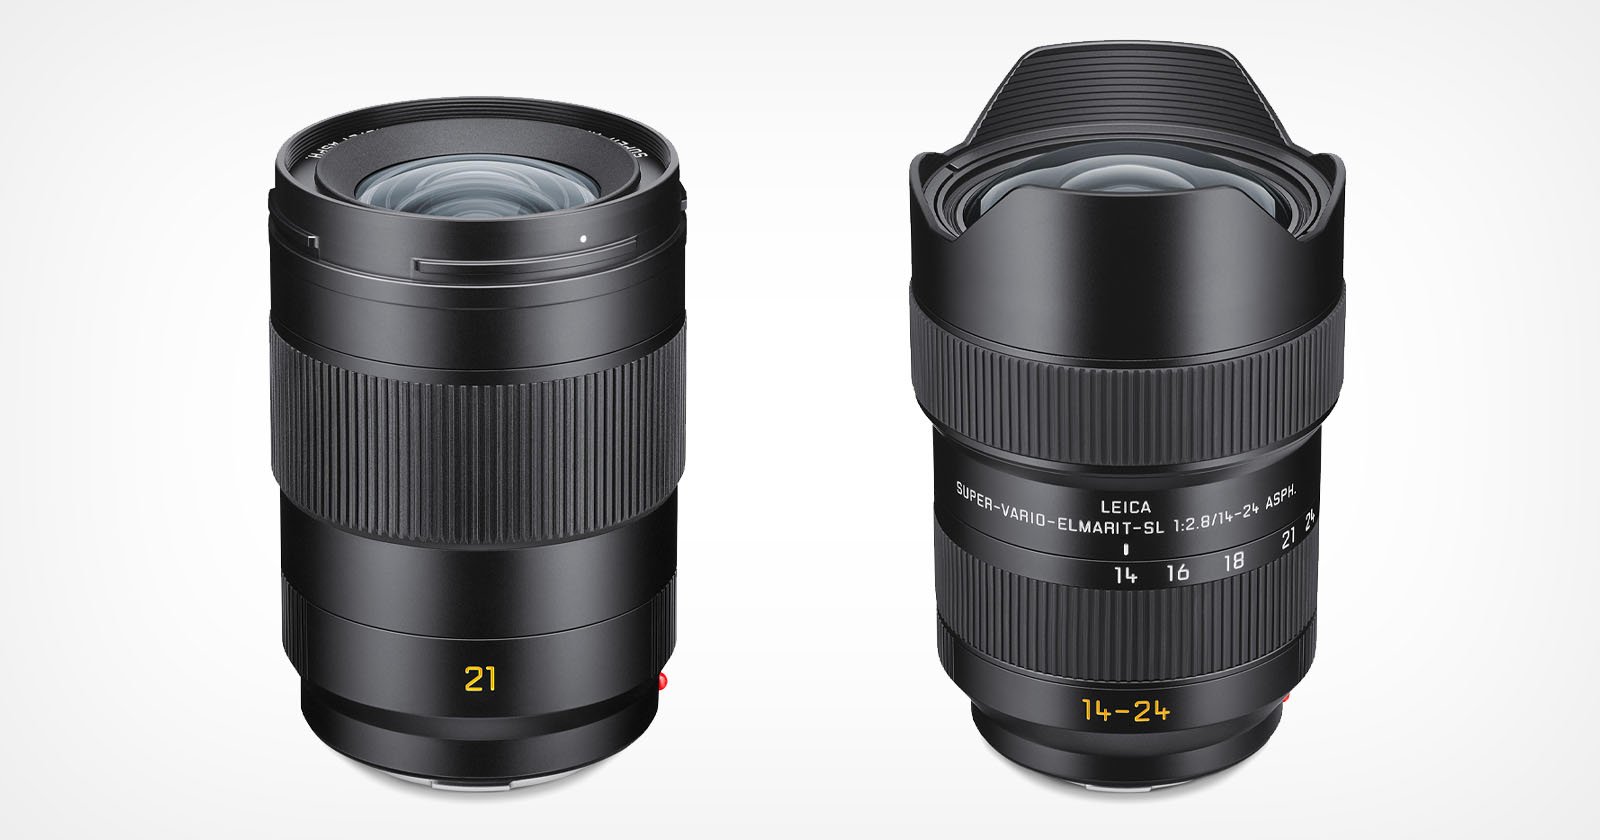  leica expands its l-mount support 21mm 